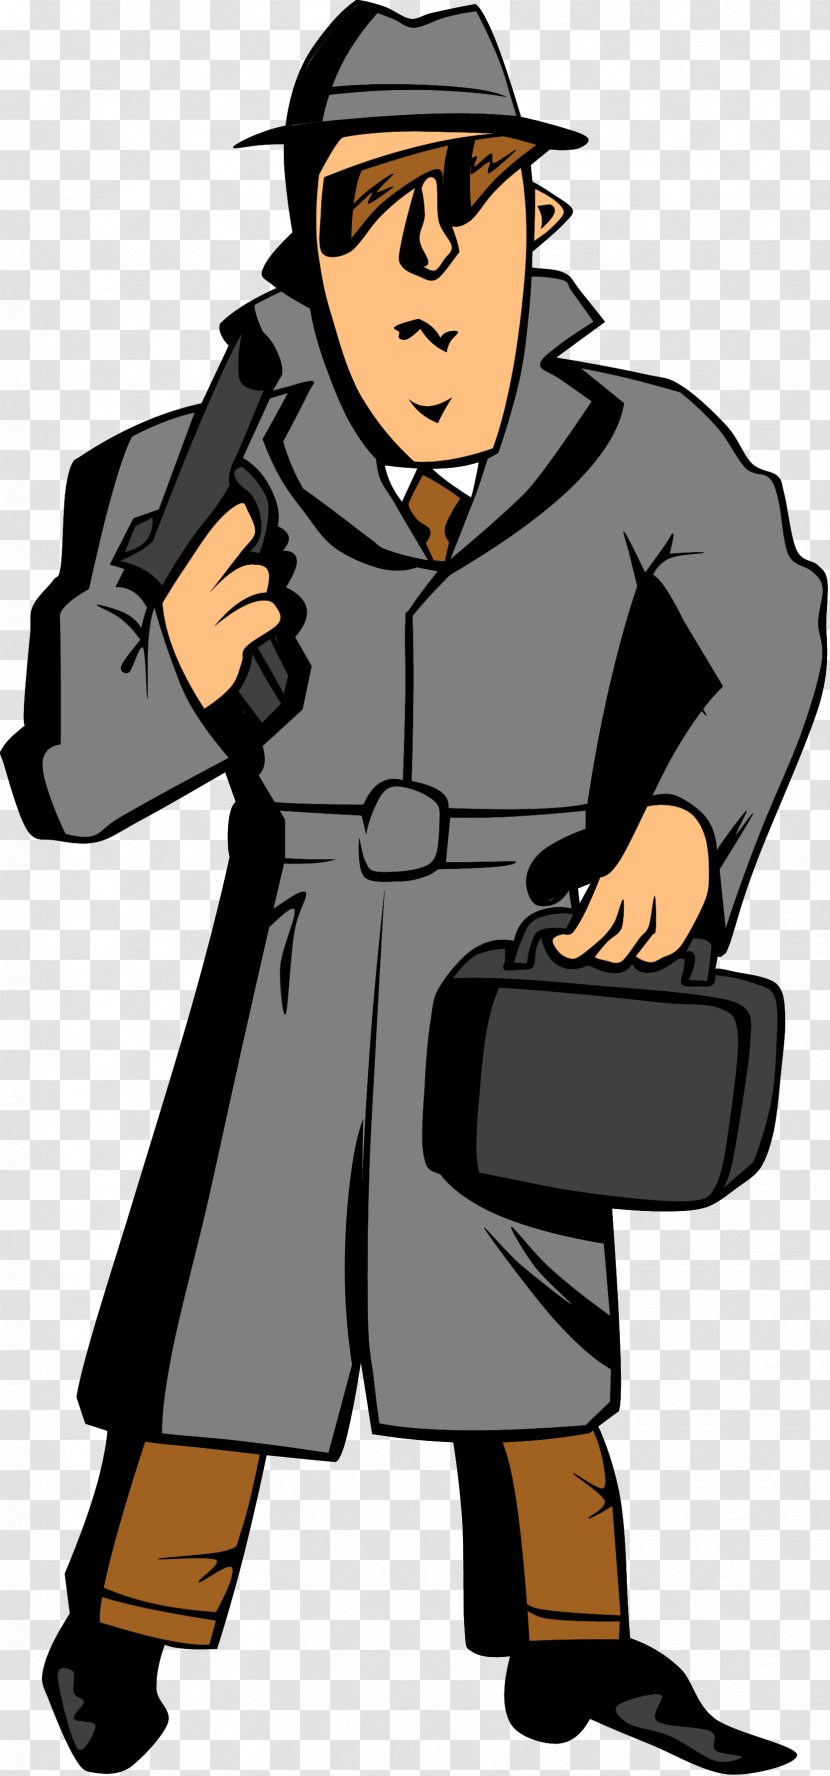 Espionage Spy Film Download Clip Art - Fictional Character - What The Hell Transparent PNG